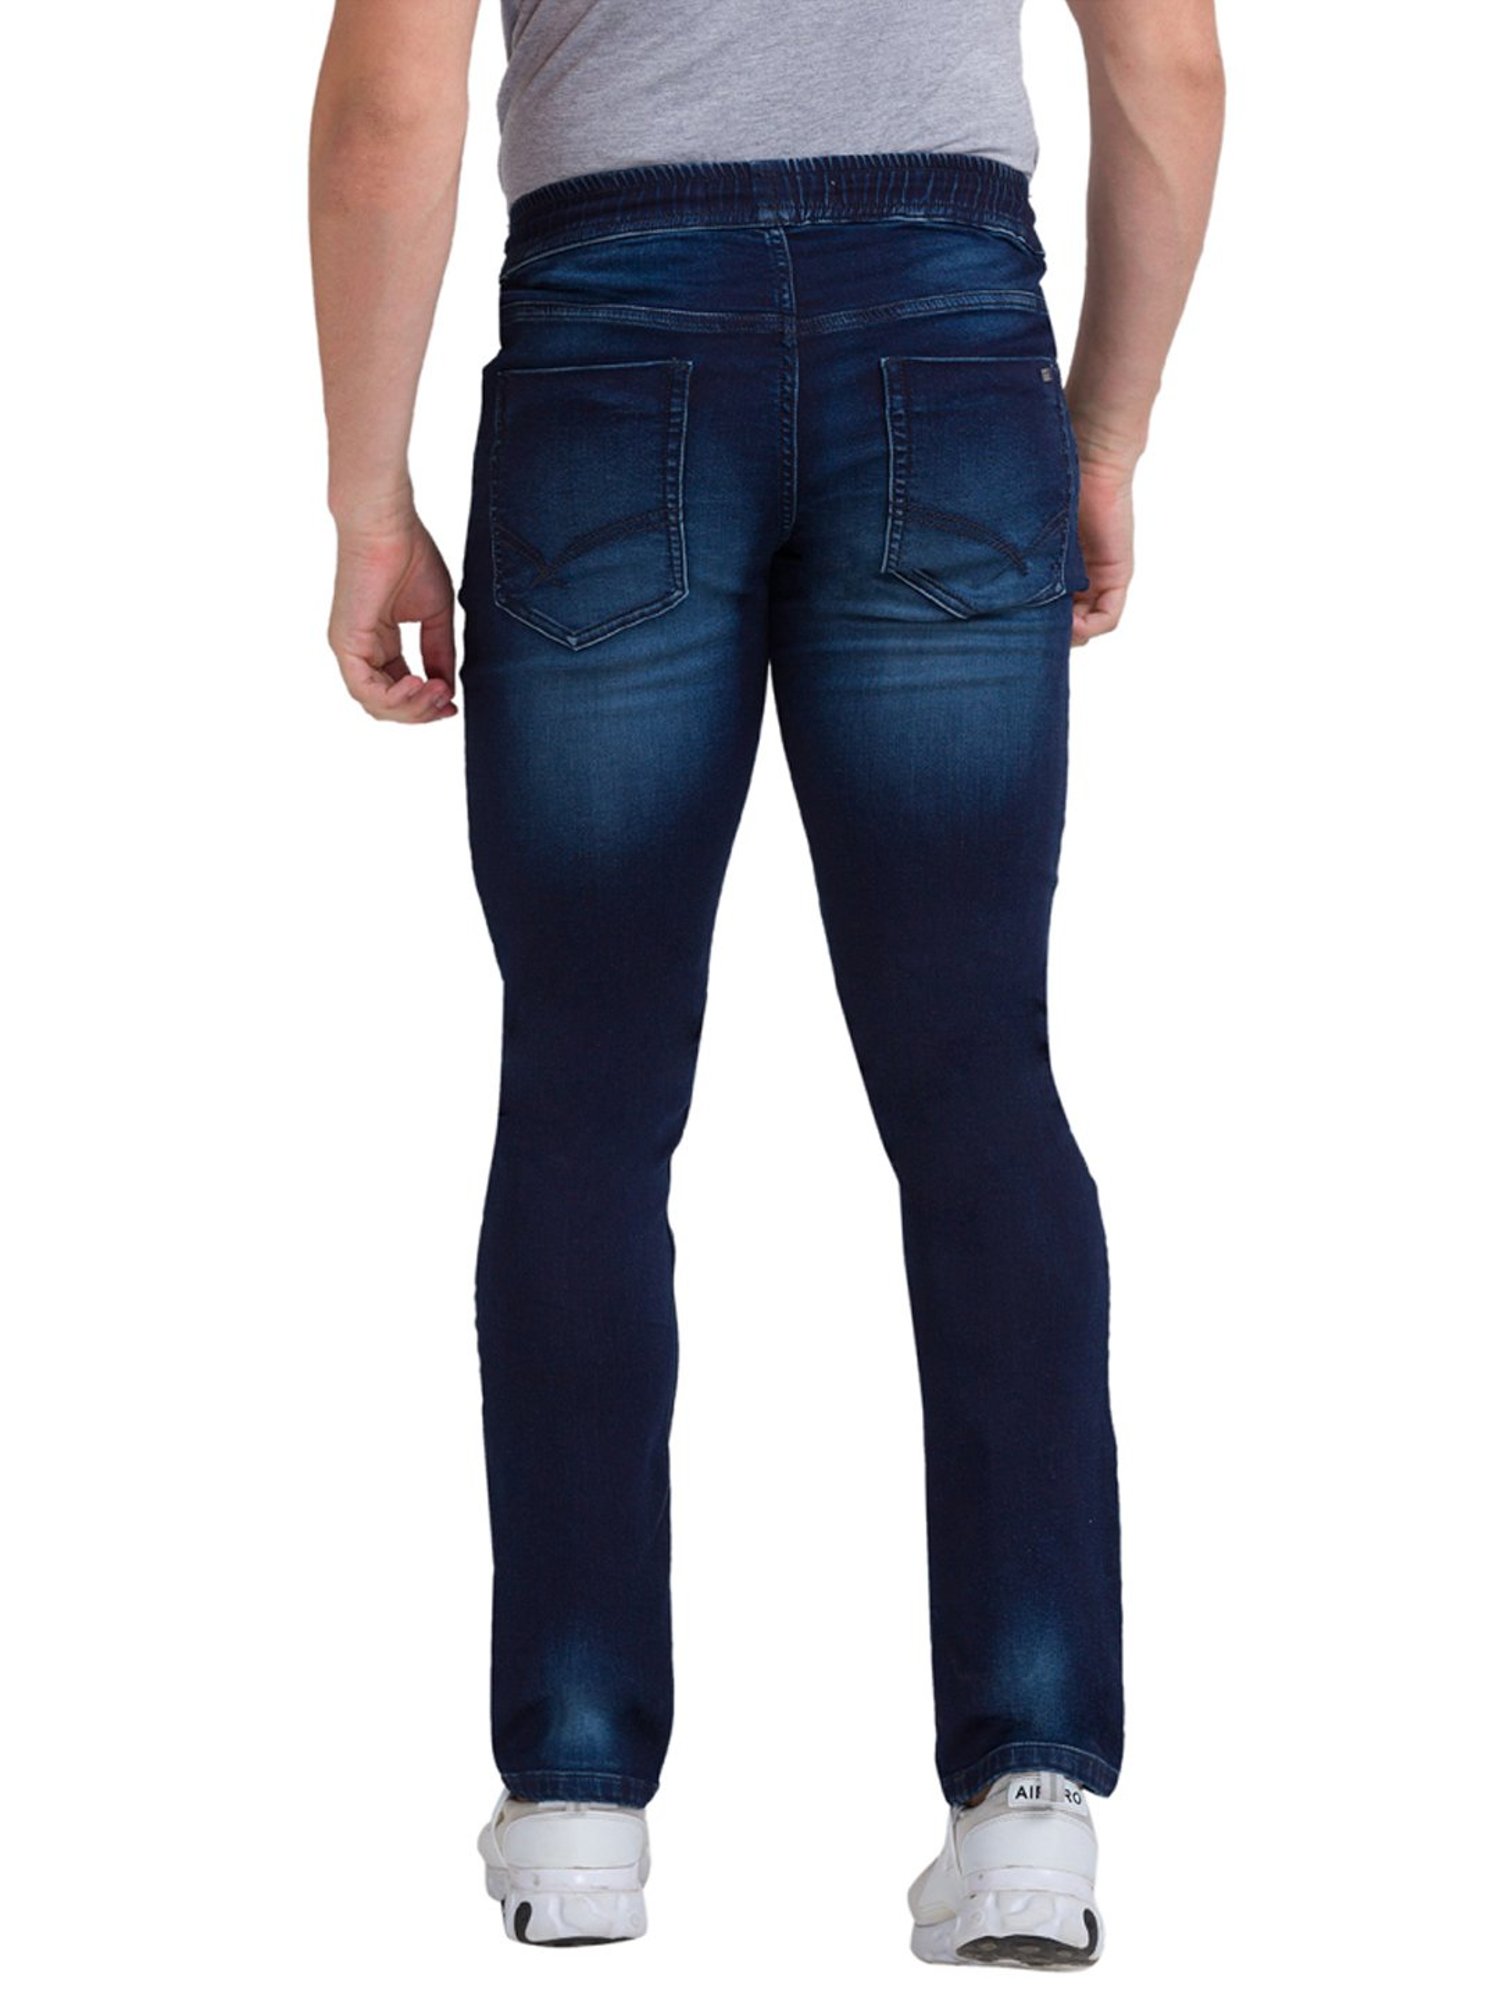 Buy Sky Blue Jeans & Jeggings for Women by DDM Clothing Online | Ajio.com